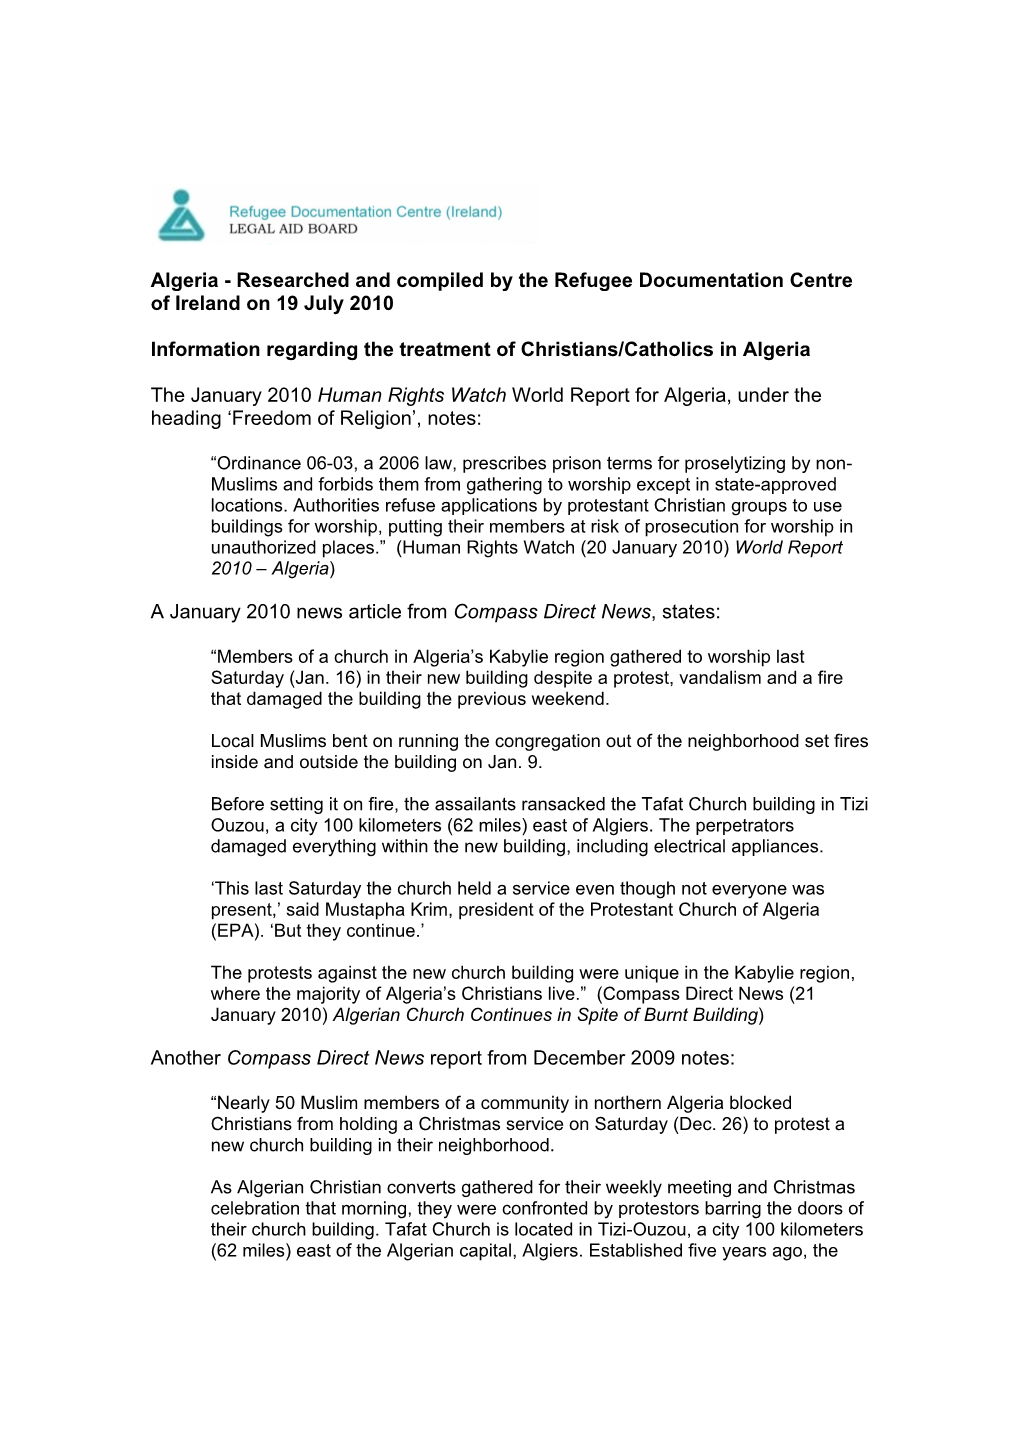 Algeria - Researched and Compiled by the Refugee Documentation Centre of Ireland on 19 July 2010